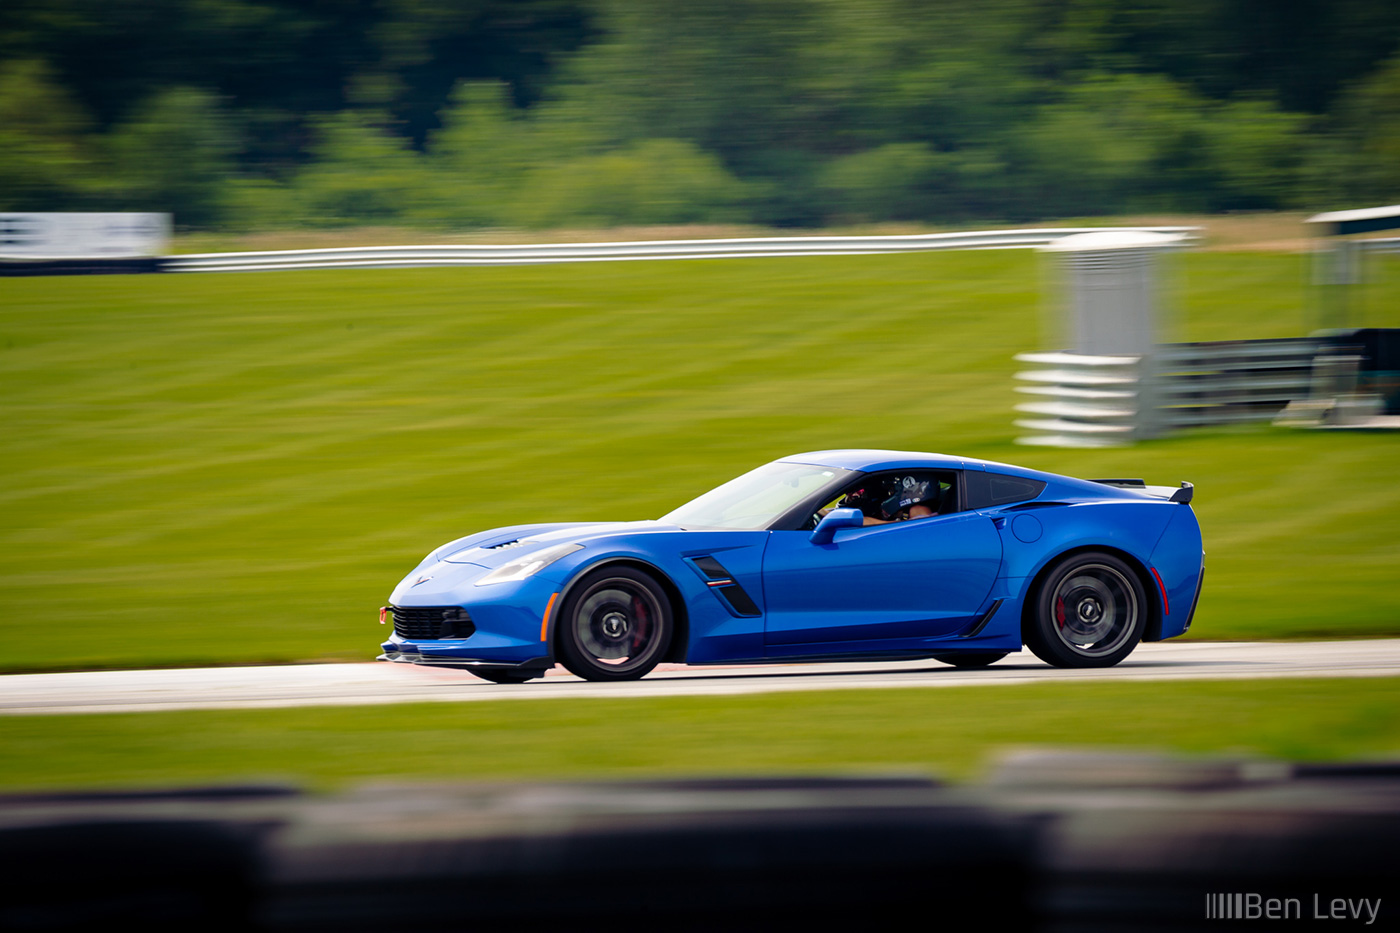 Jack (from SavageGeese) Driving His Corvette Grand Sport at Autobahn Country Club